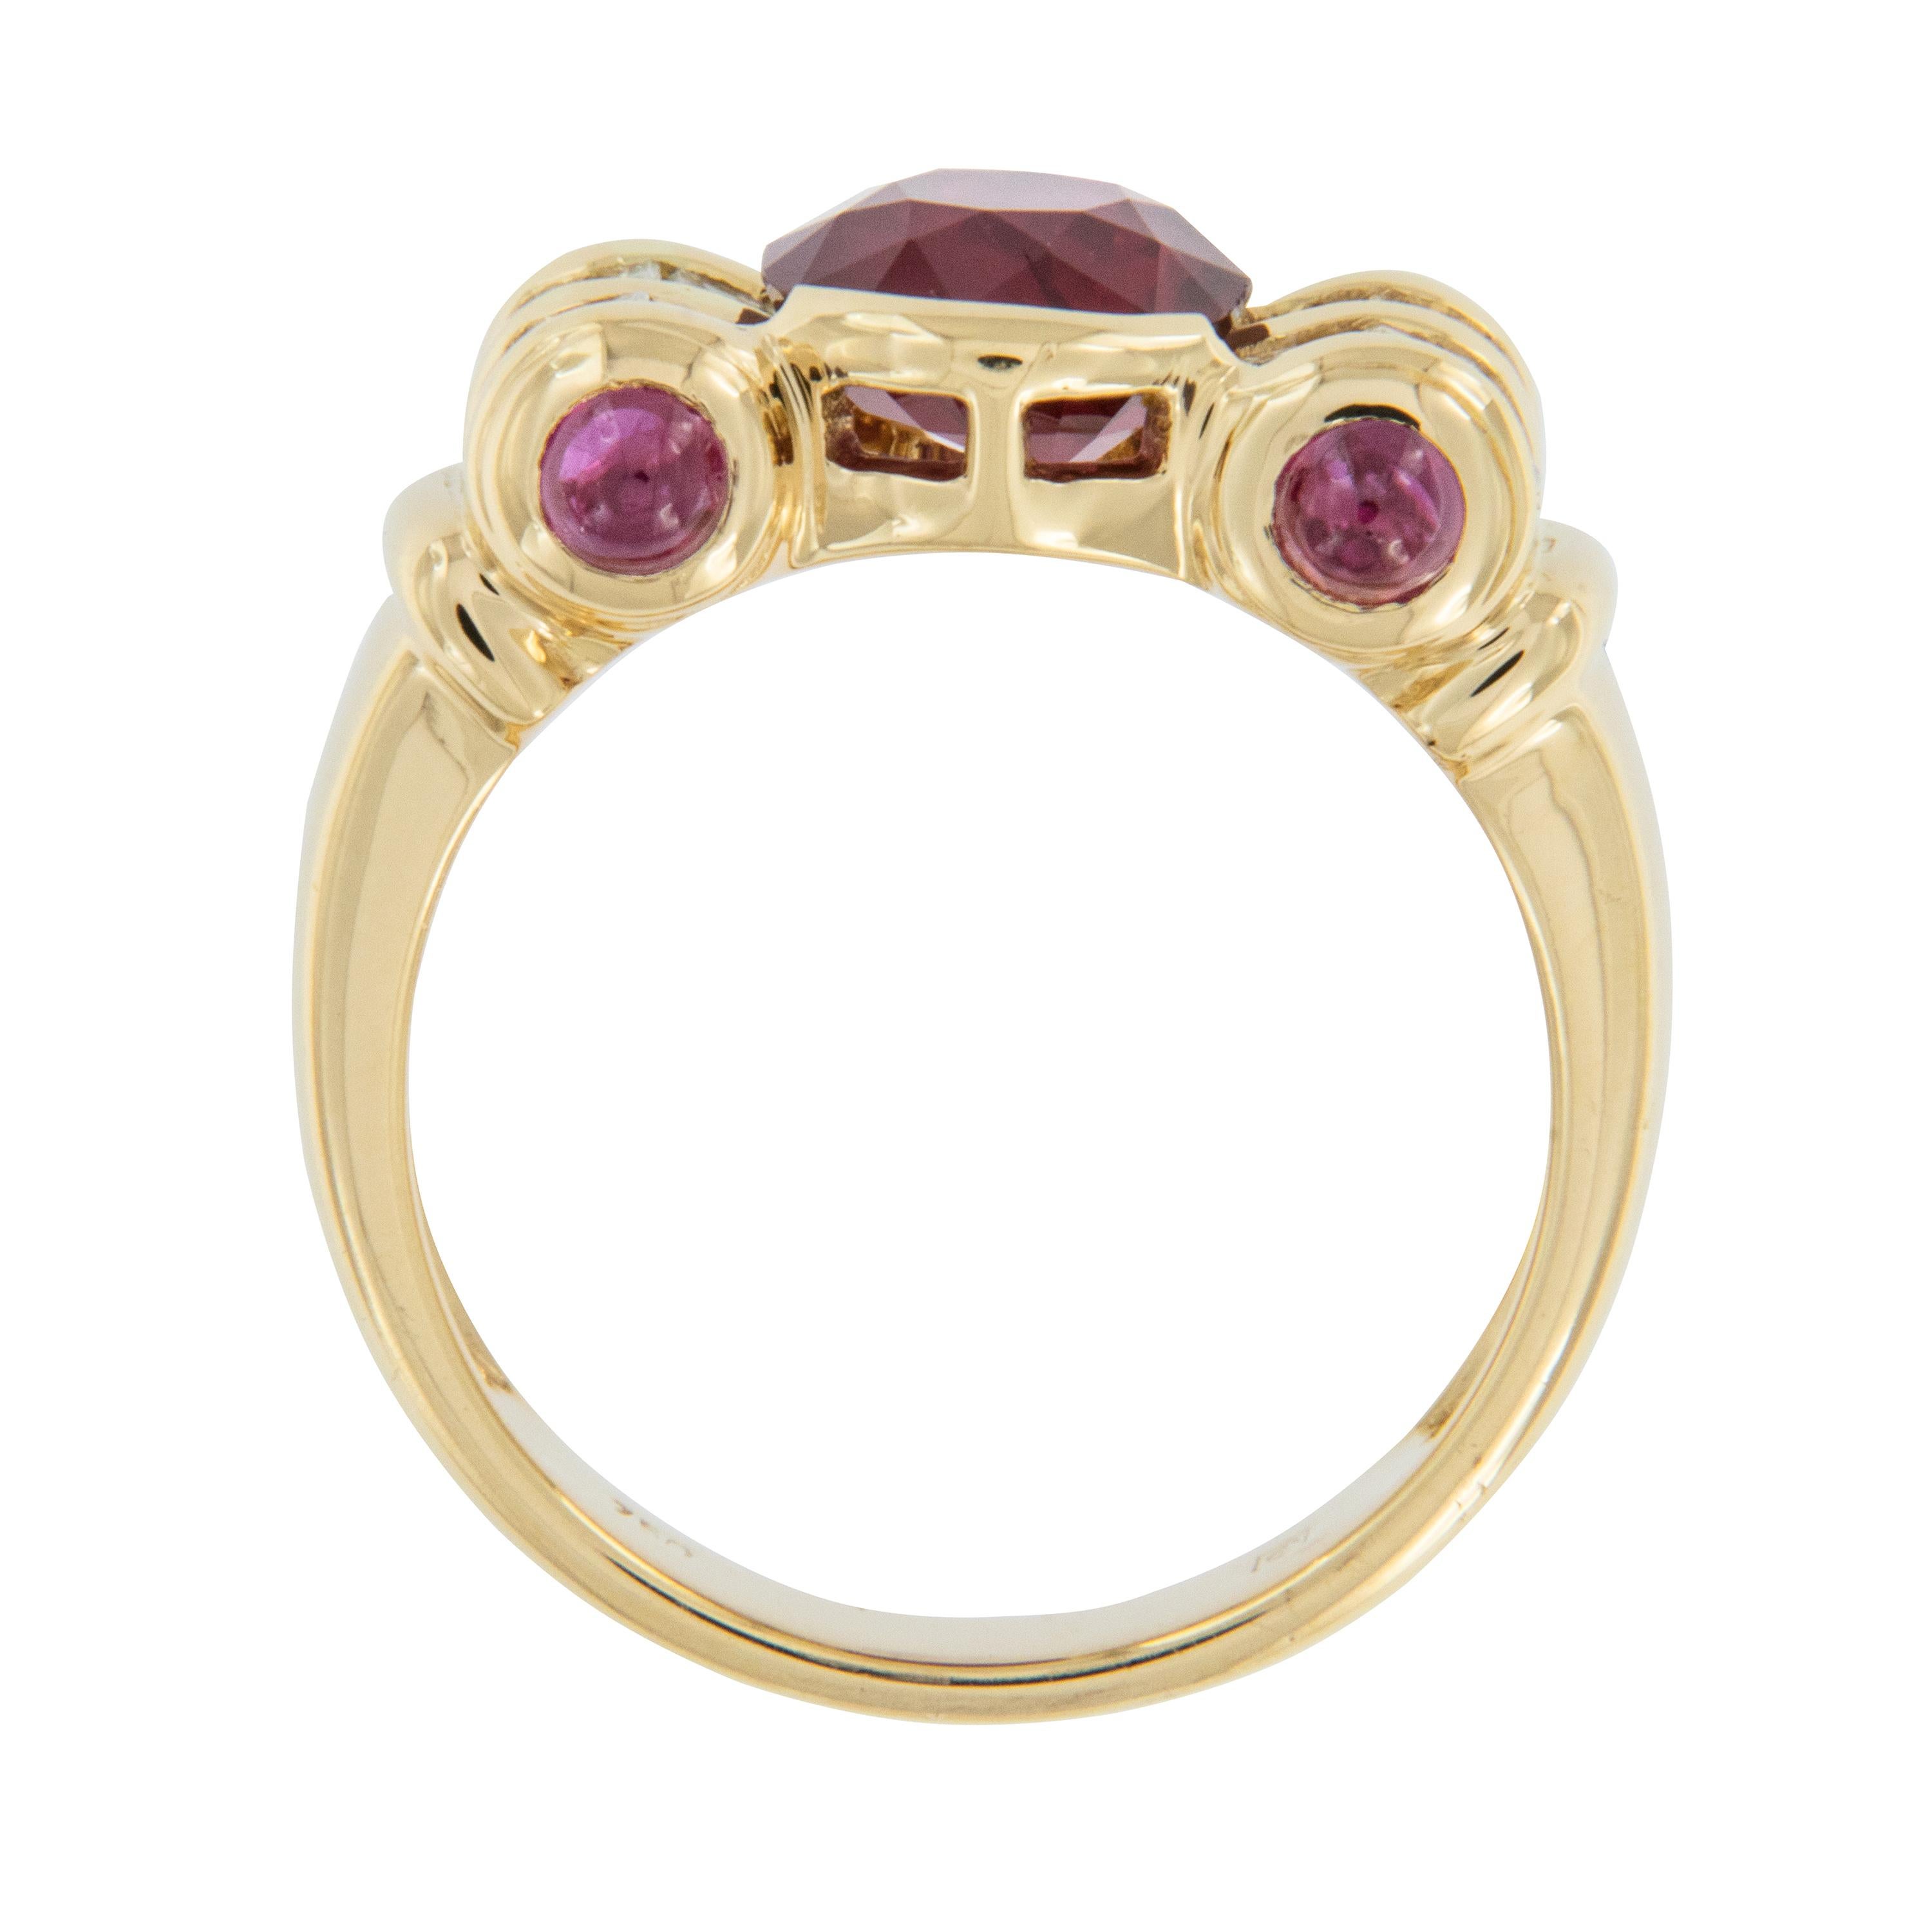 2000 ago rubies were discovered in India and the Sanskrit word for ruby is “ratnaraj” which roughly translates to “king of the gems.” This 18 karat yellow gold, royal red ruby ring with sinuous rolled top has 1 oval ruby & 4 cabochon cut rubies =